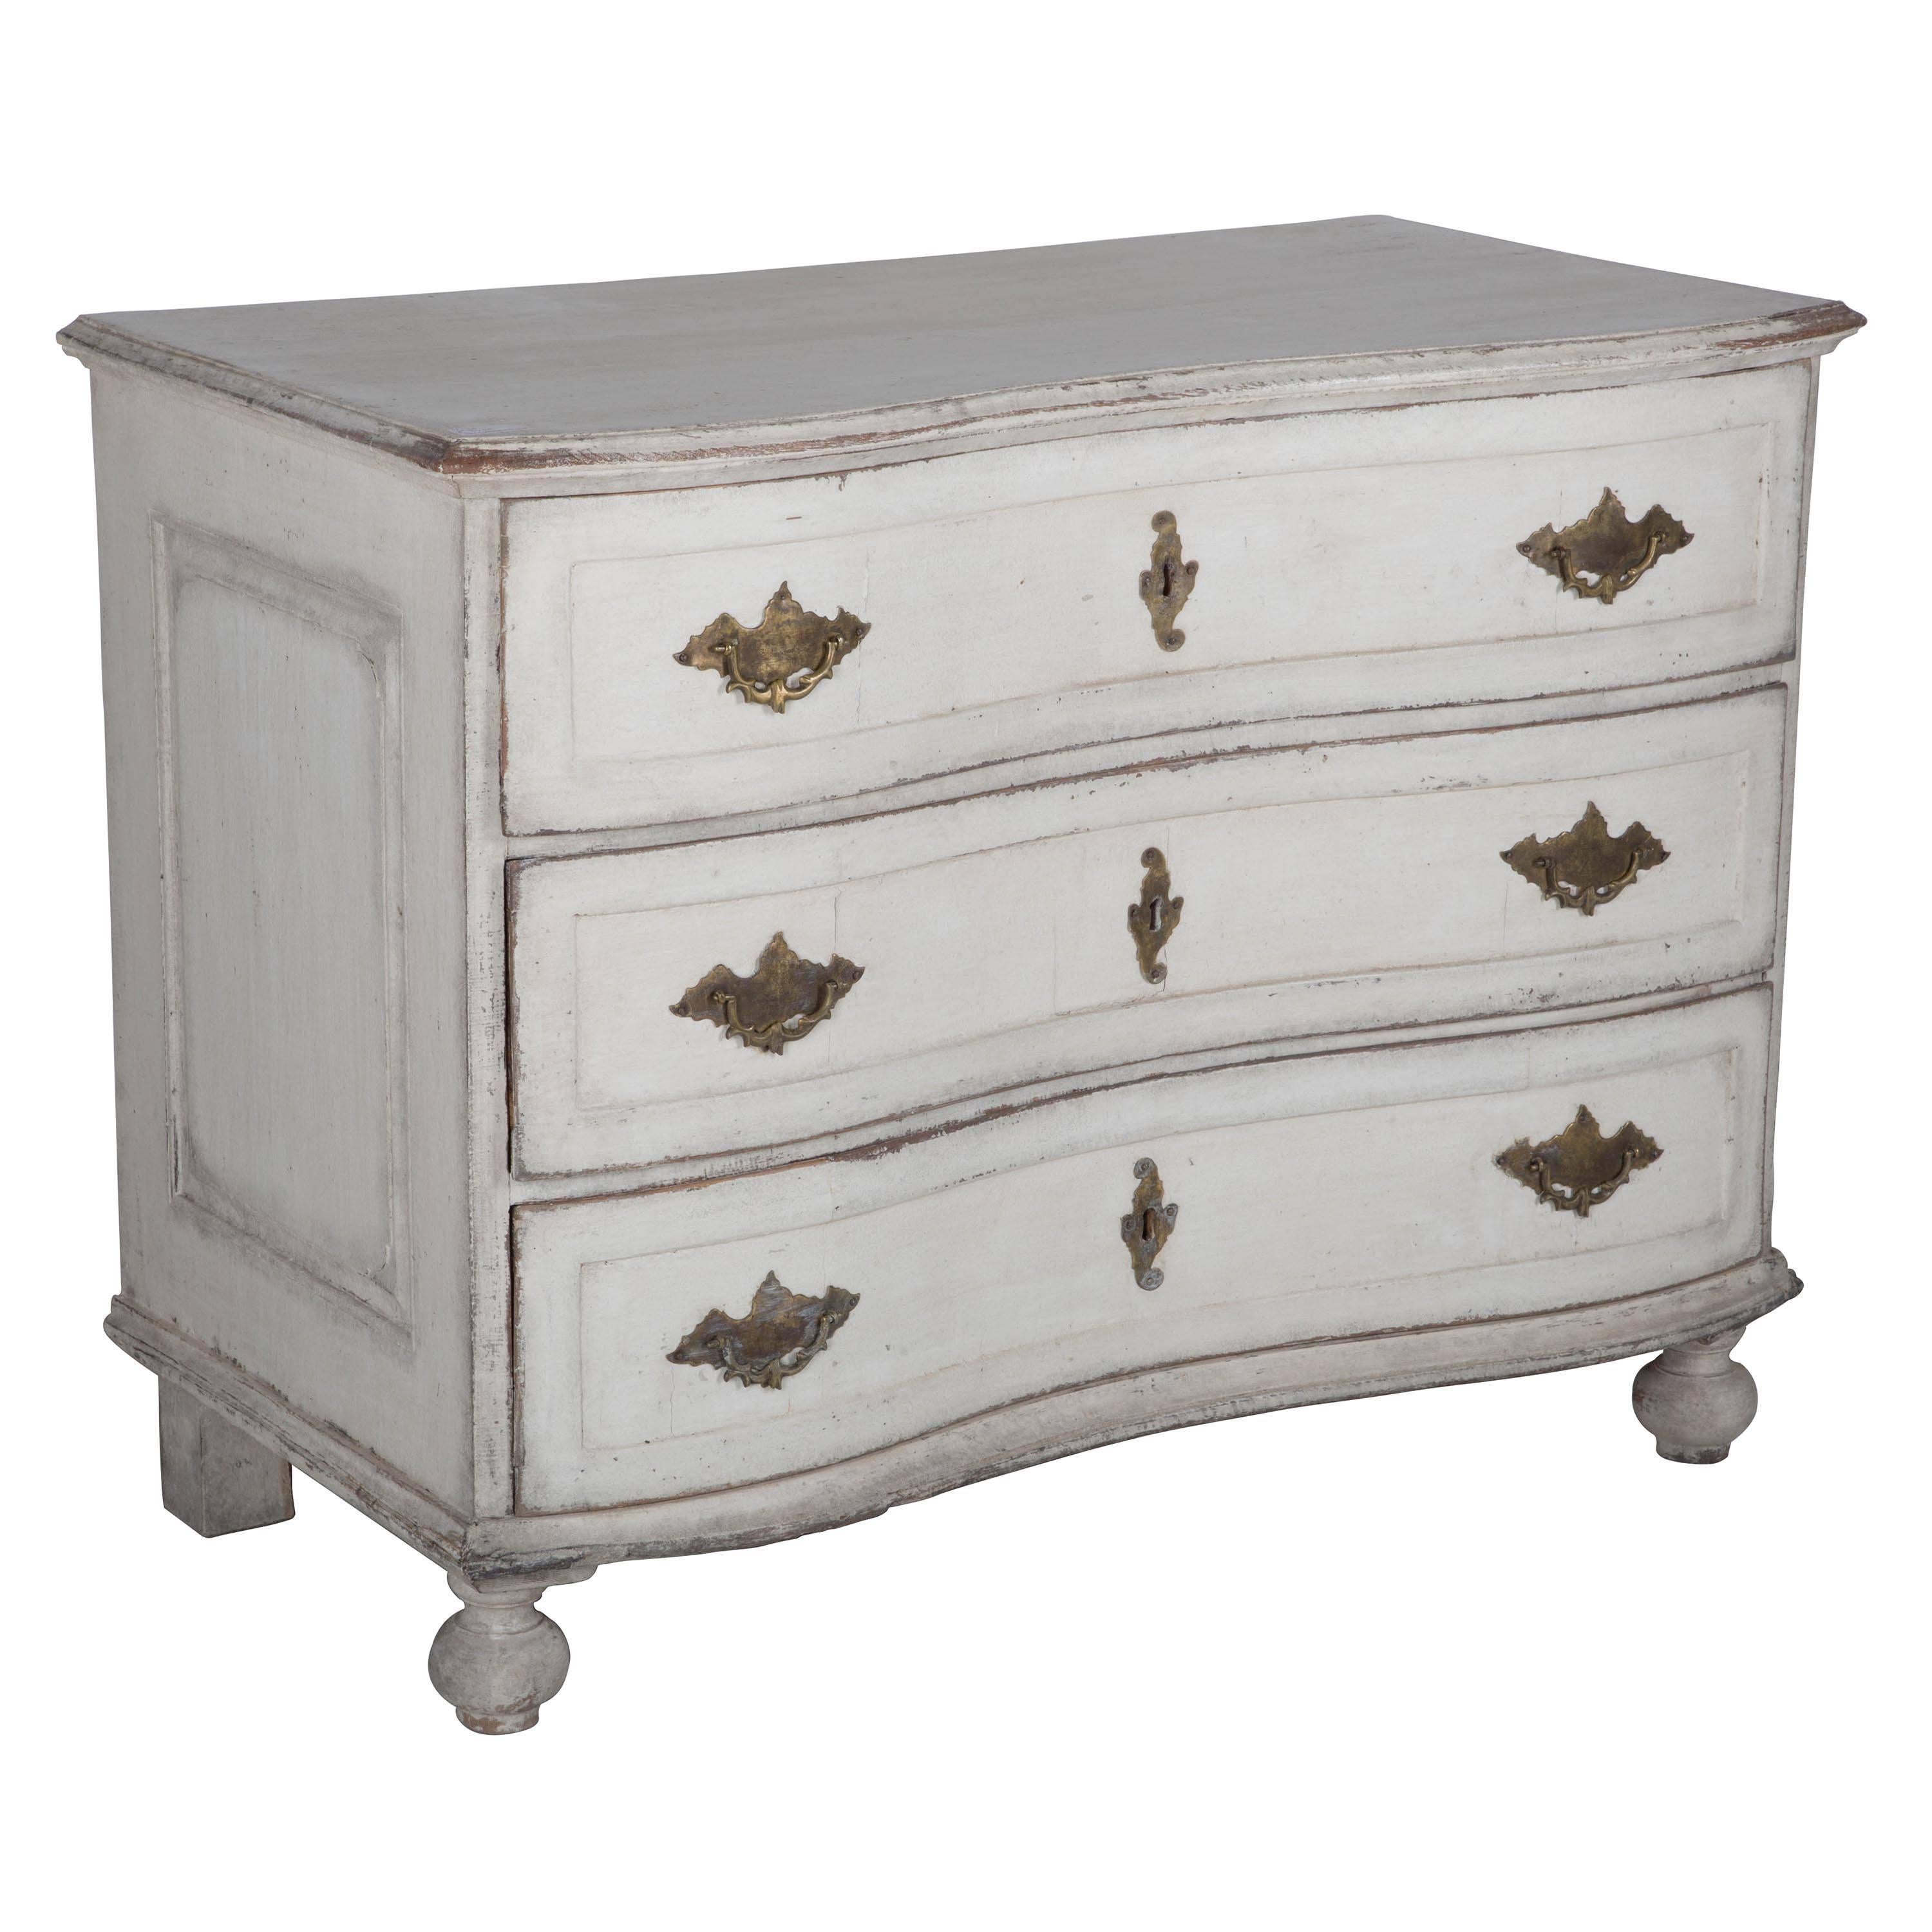 18th century antique painted serpentine commode, 1760.